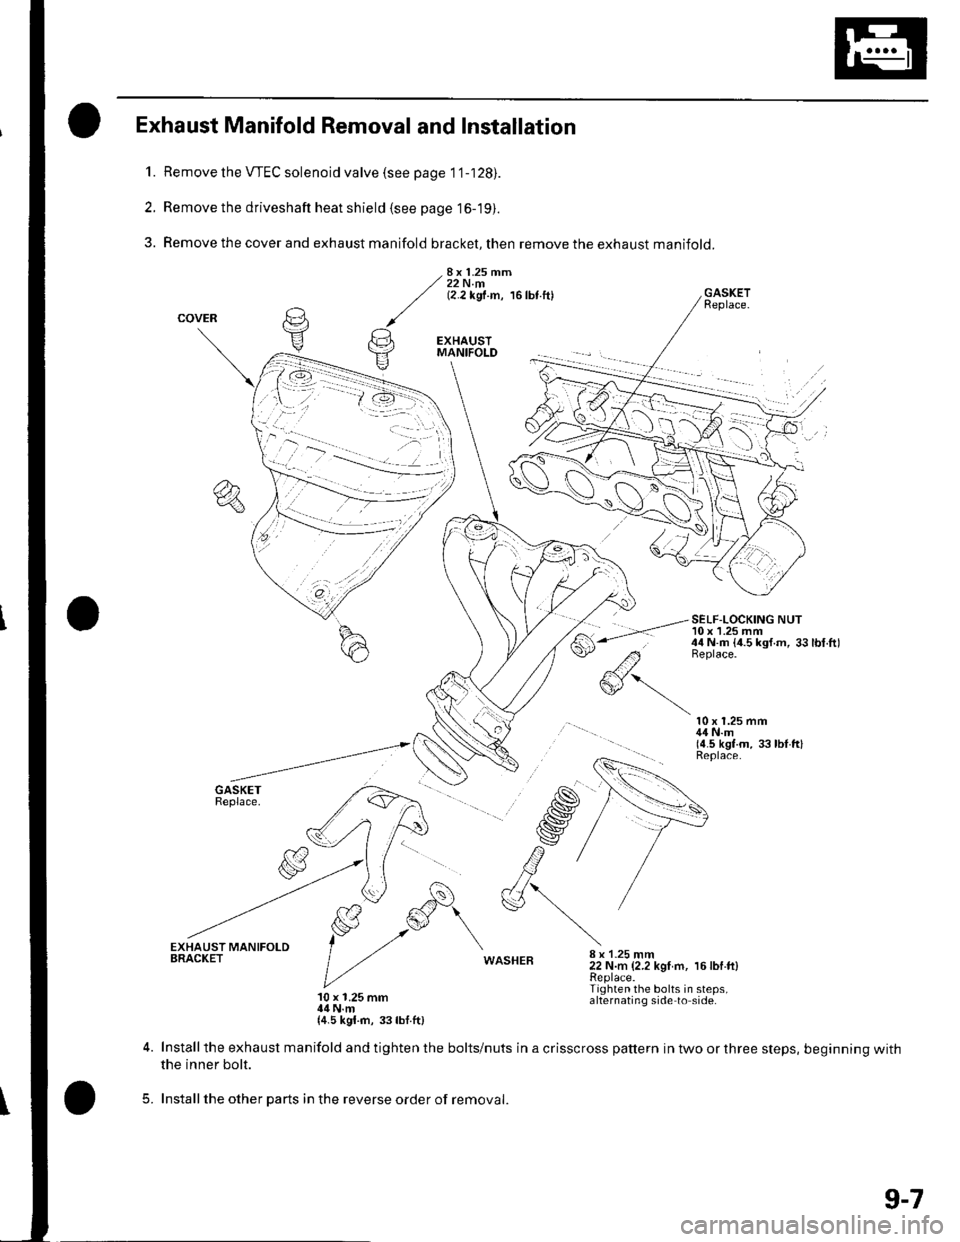 HONDA CIVIC 2003 7.G Workshop Manual 1.
2.
3.
Exhaust Manifold Removal and Installation
Remove the VTEC solenoid valve (see page 1 1-128).
Remove the driveshaft heat shield (see page 16-19).
Remove the cover and exhaust manifold bracket